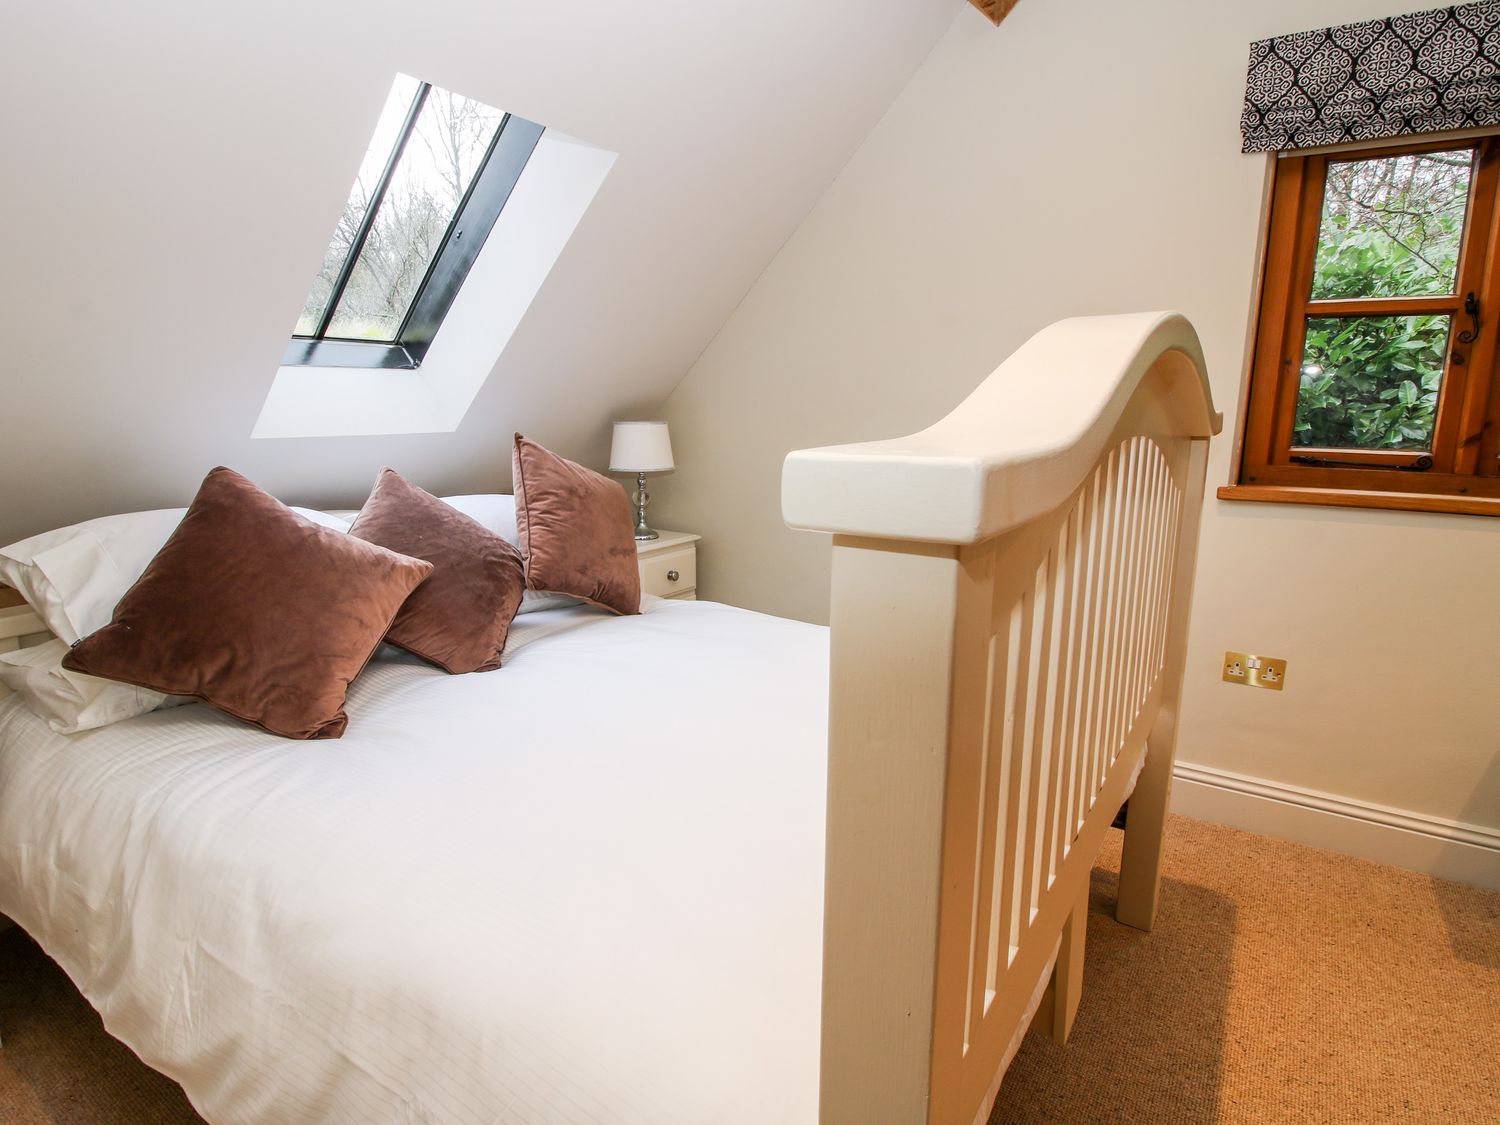 Pultheley Cottage, Churchstoke, Shropshire. First-floor apartment. Perfect for two. Open-plan living